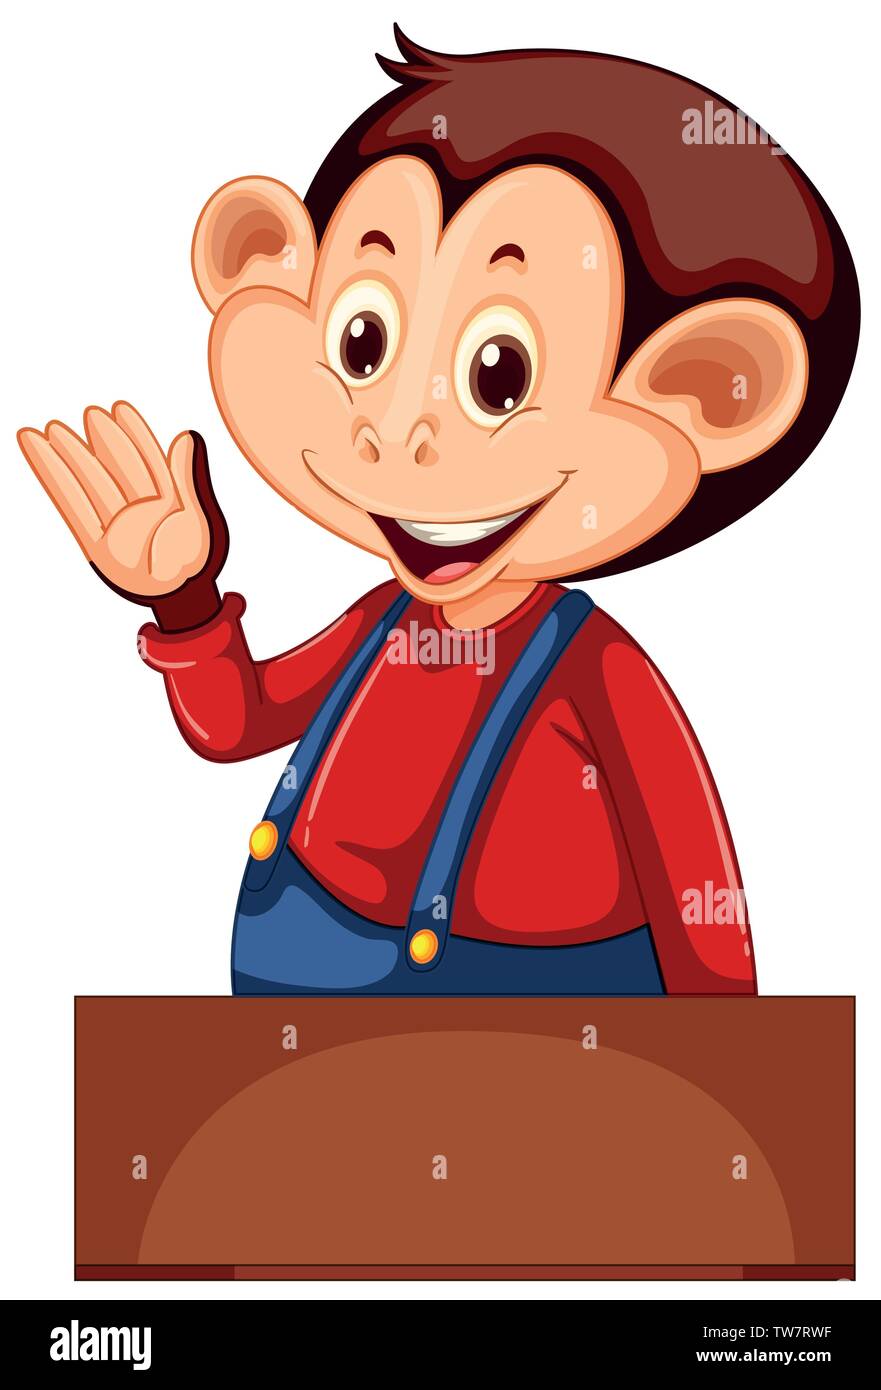 A cute monkey character illustration Stock Vector